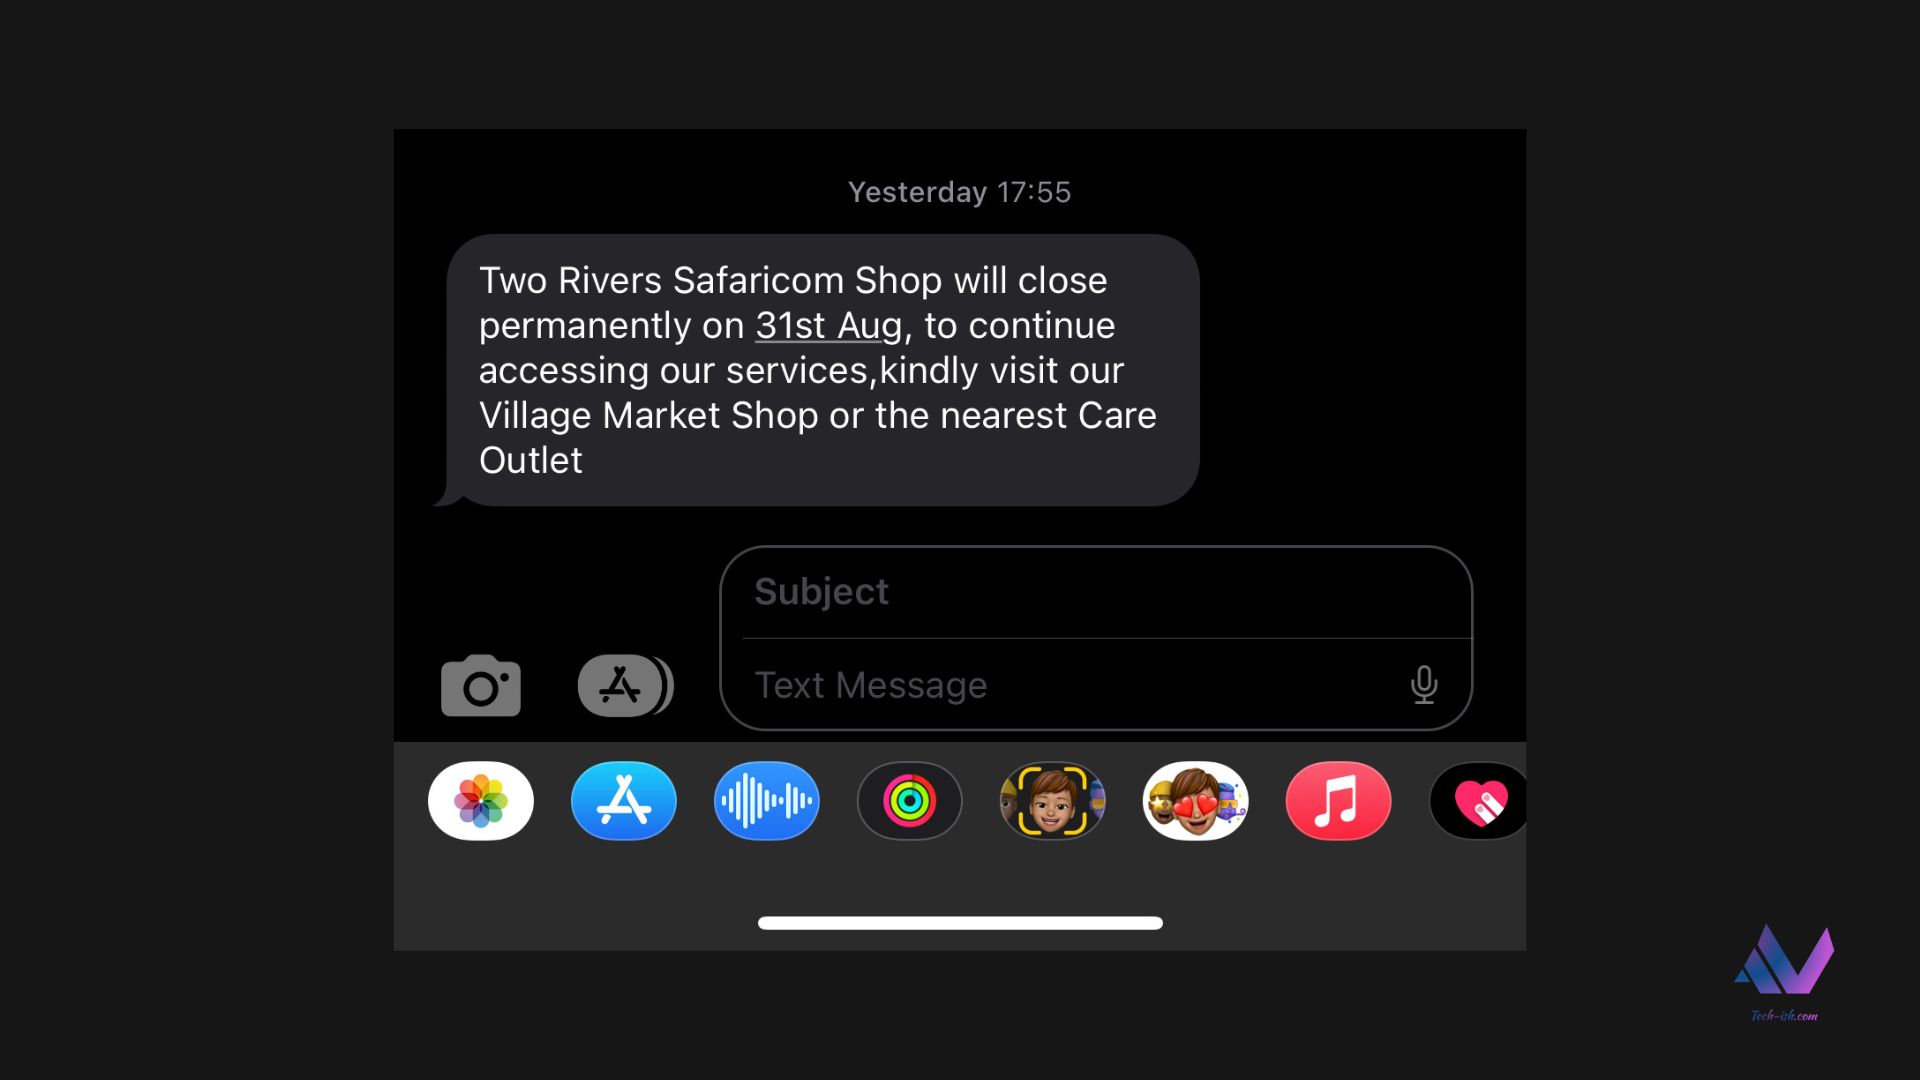 Safaricom permanently closing Two Rivers Outlet